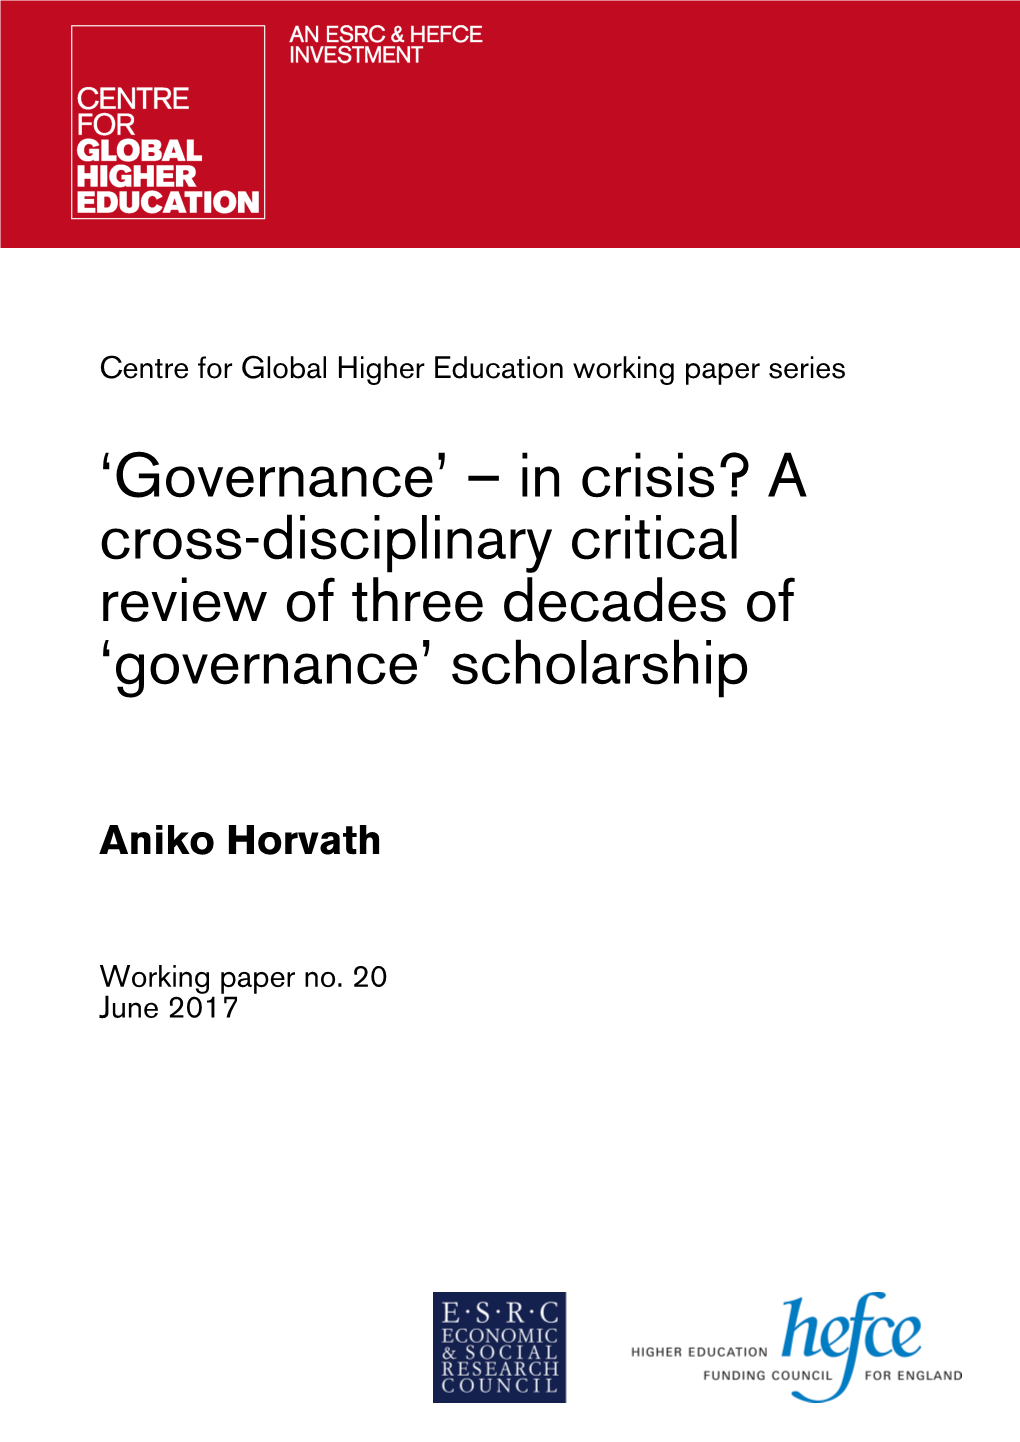 Governance’ – in Crisis? a Cross-Disciplinary Critical Review of Three Decades of ‘Governance’ Scholarship